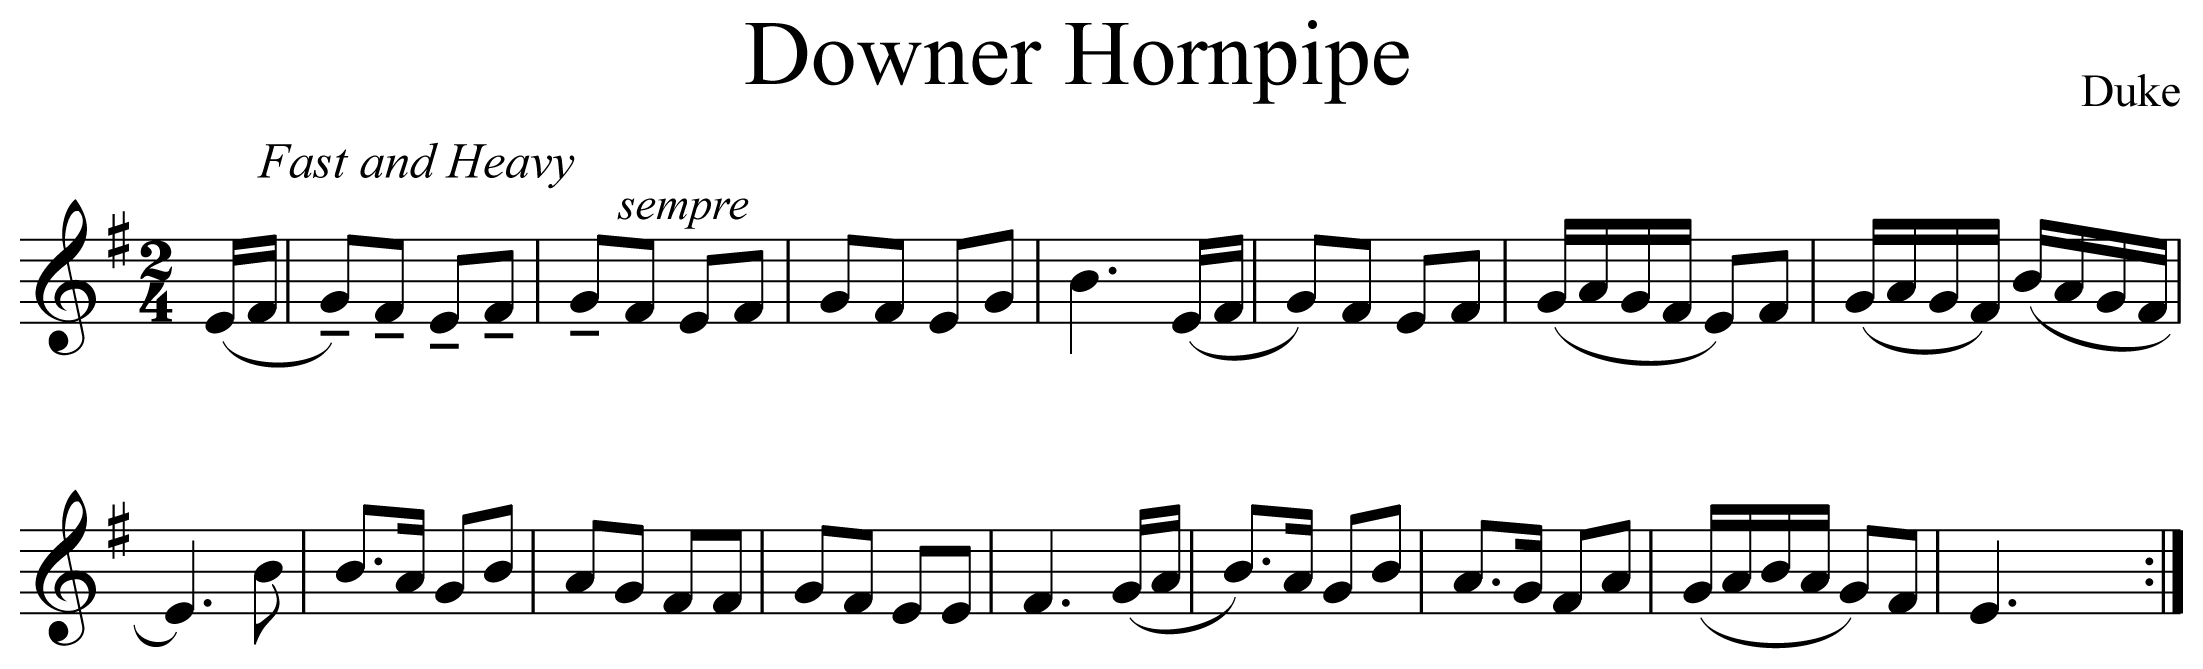 Downer Hornpipe Notation Trumpet